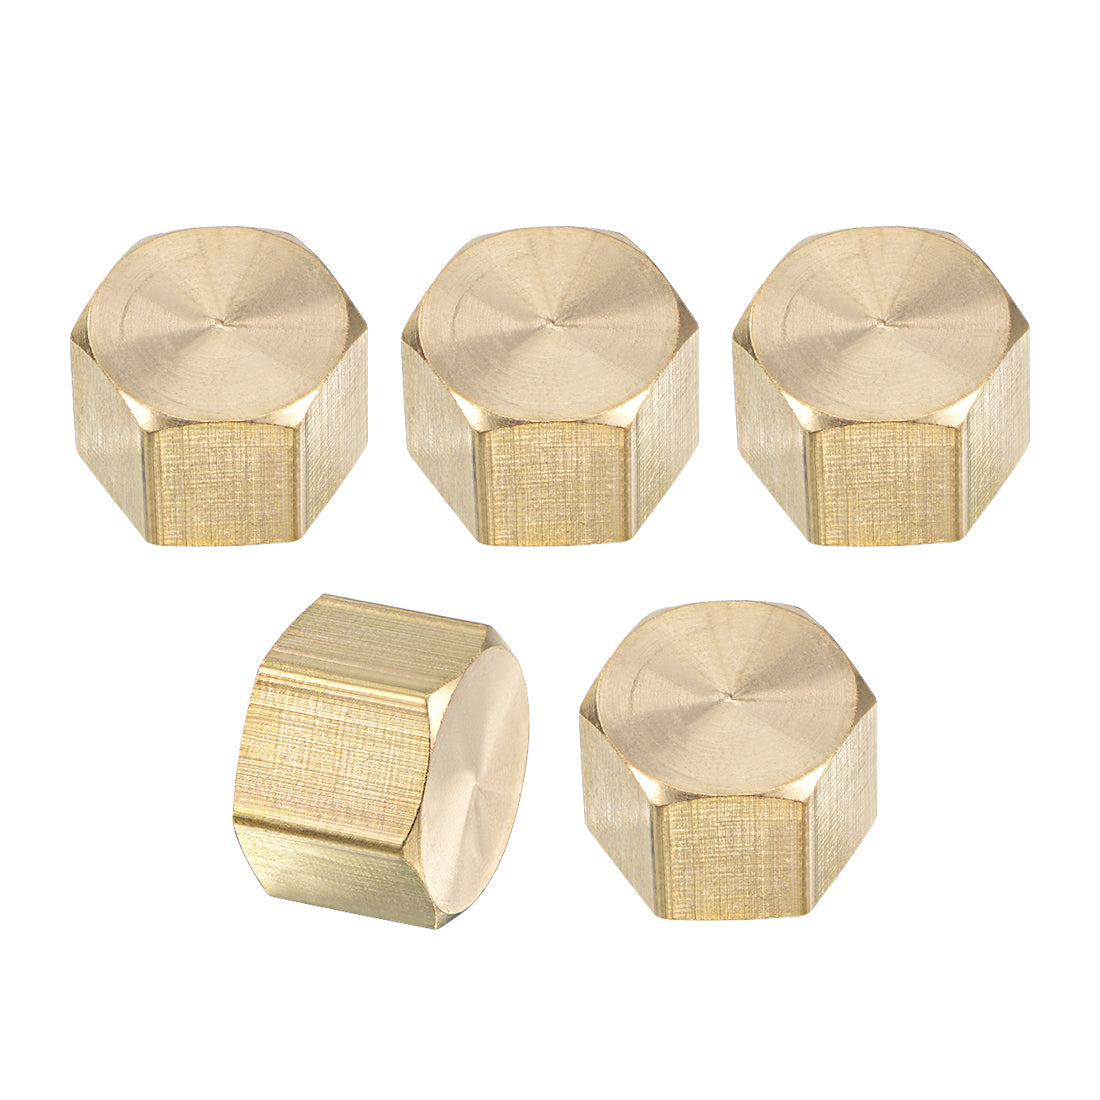 uxcell Uxcell 1/4-Inch Brass Cap 5pcs G1/4 Female Pipe Fitting Hex Compression Stop Valve Connector